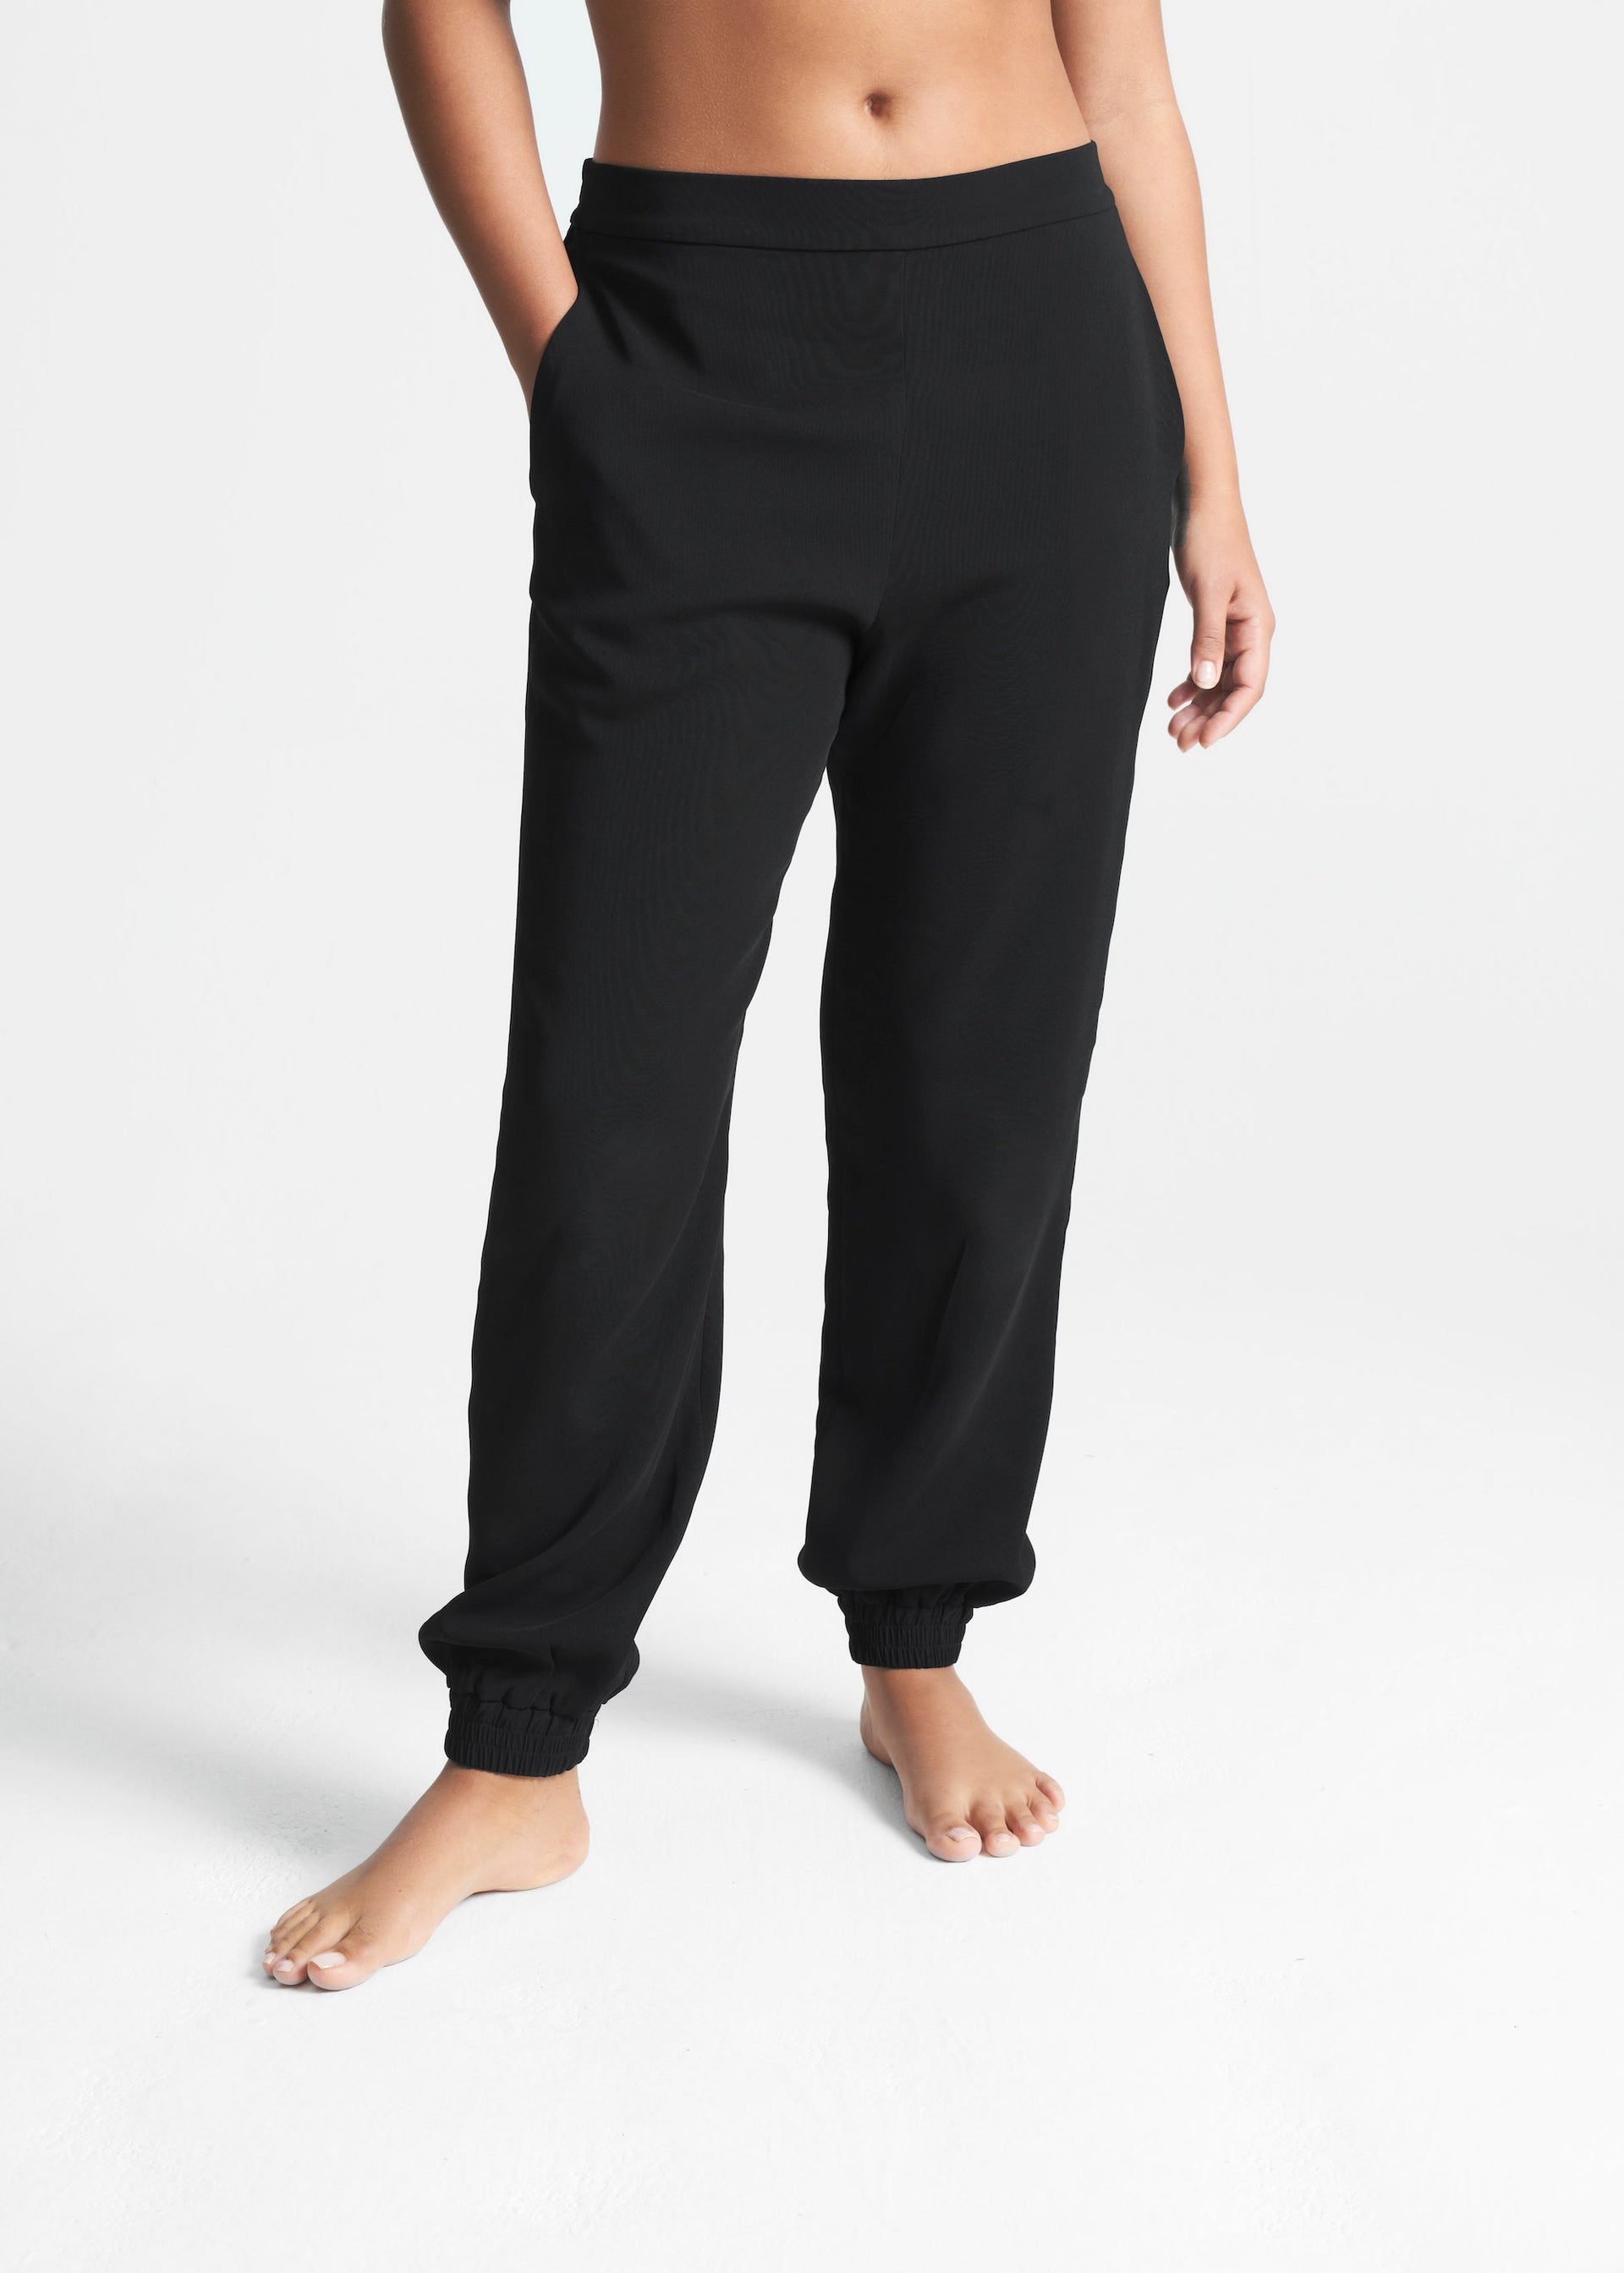 Moscow Elasticated Cuff Trouser Black Viscose Crepe